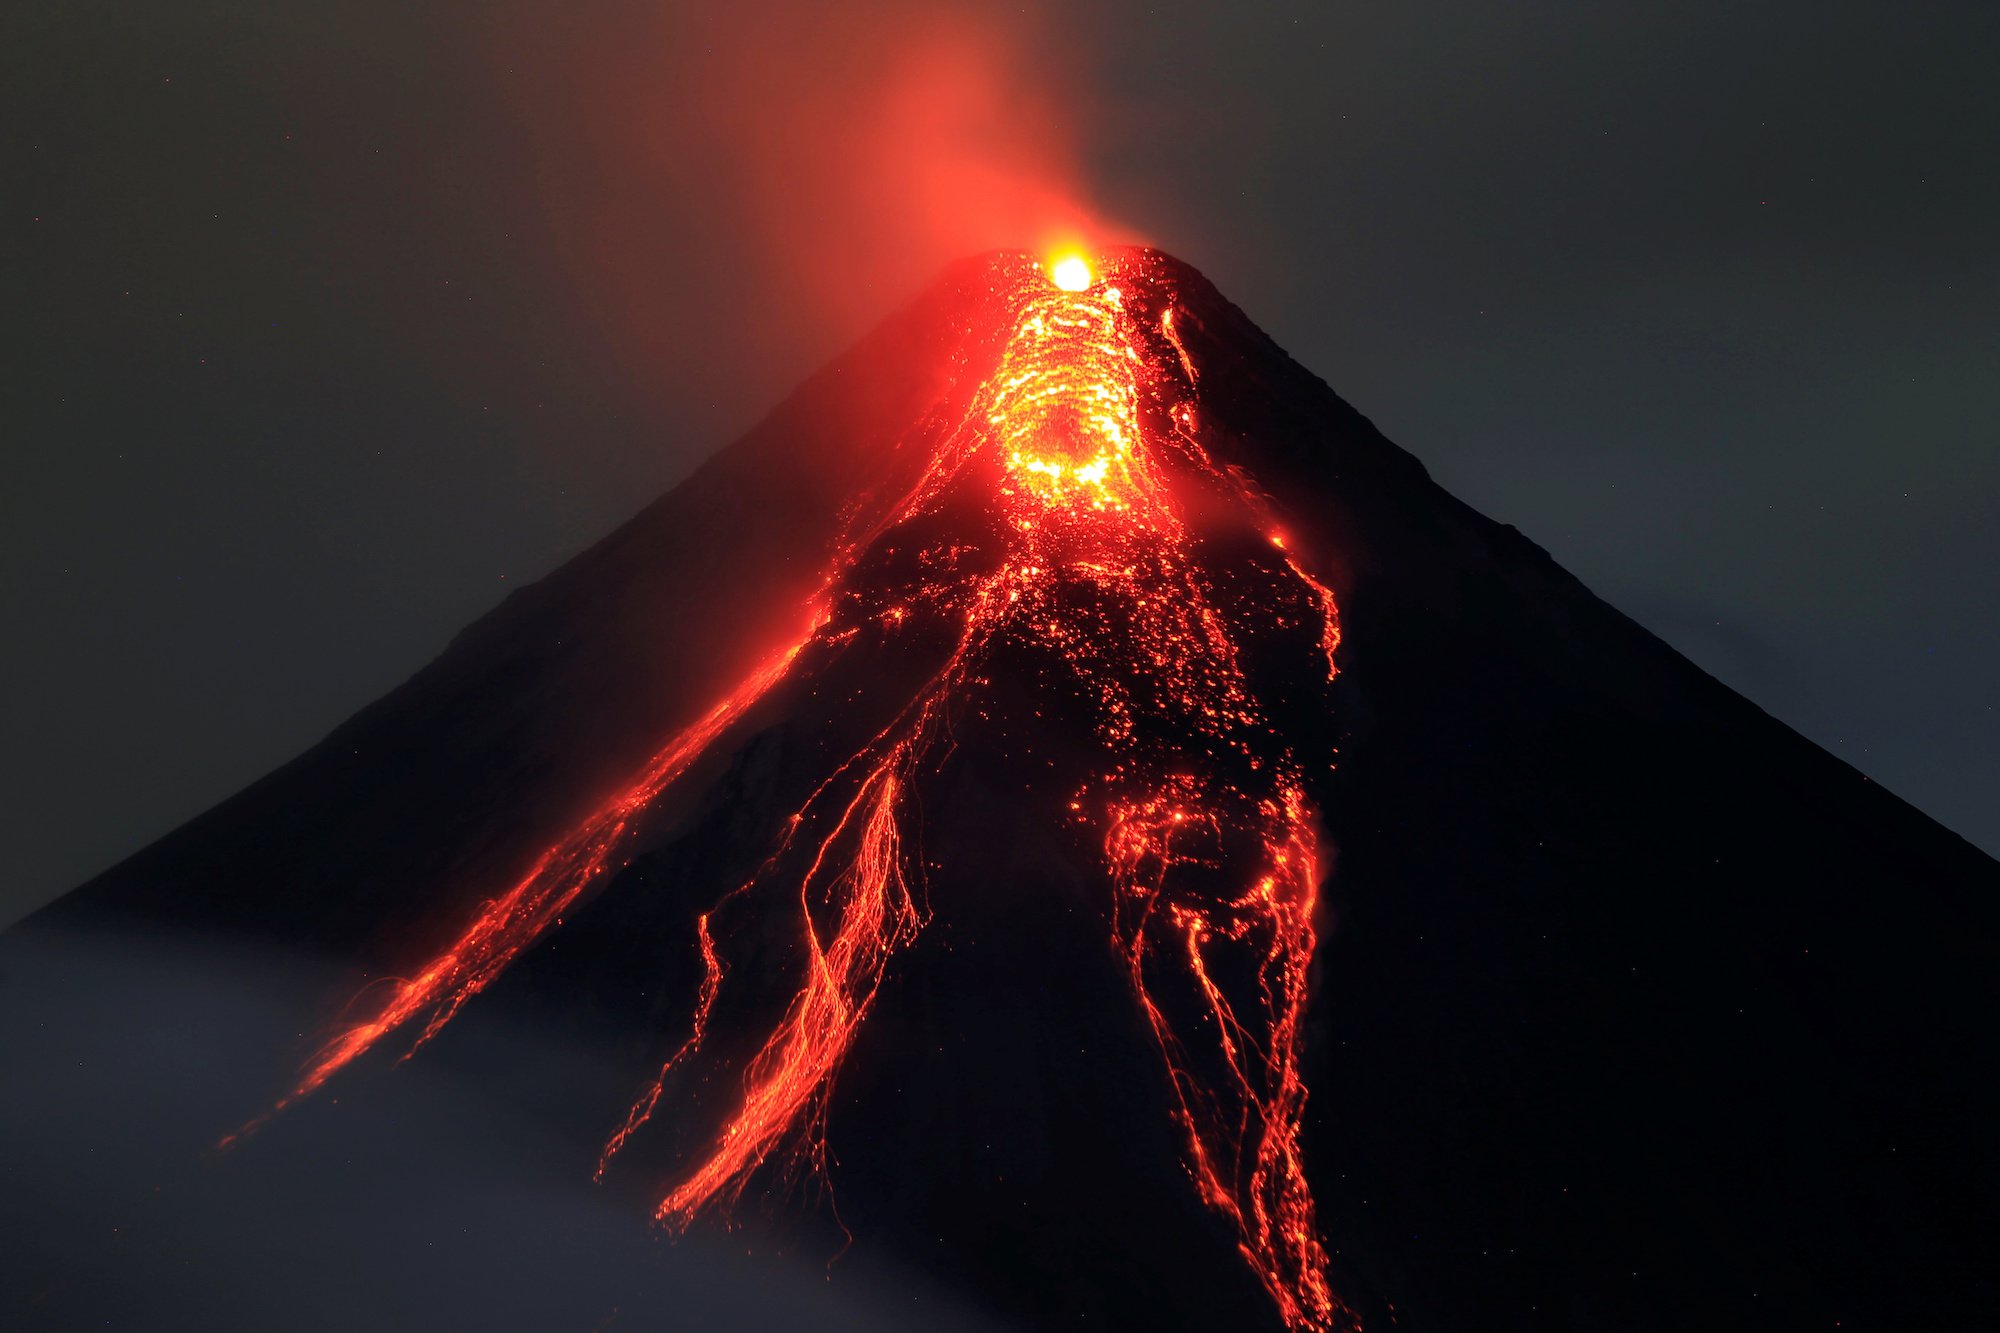 Geologists take burning-hot lava samples from active volcanoes ...